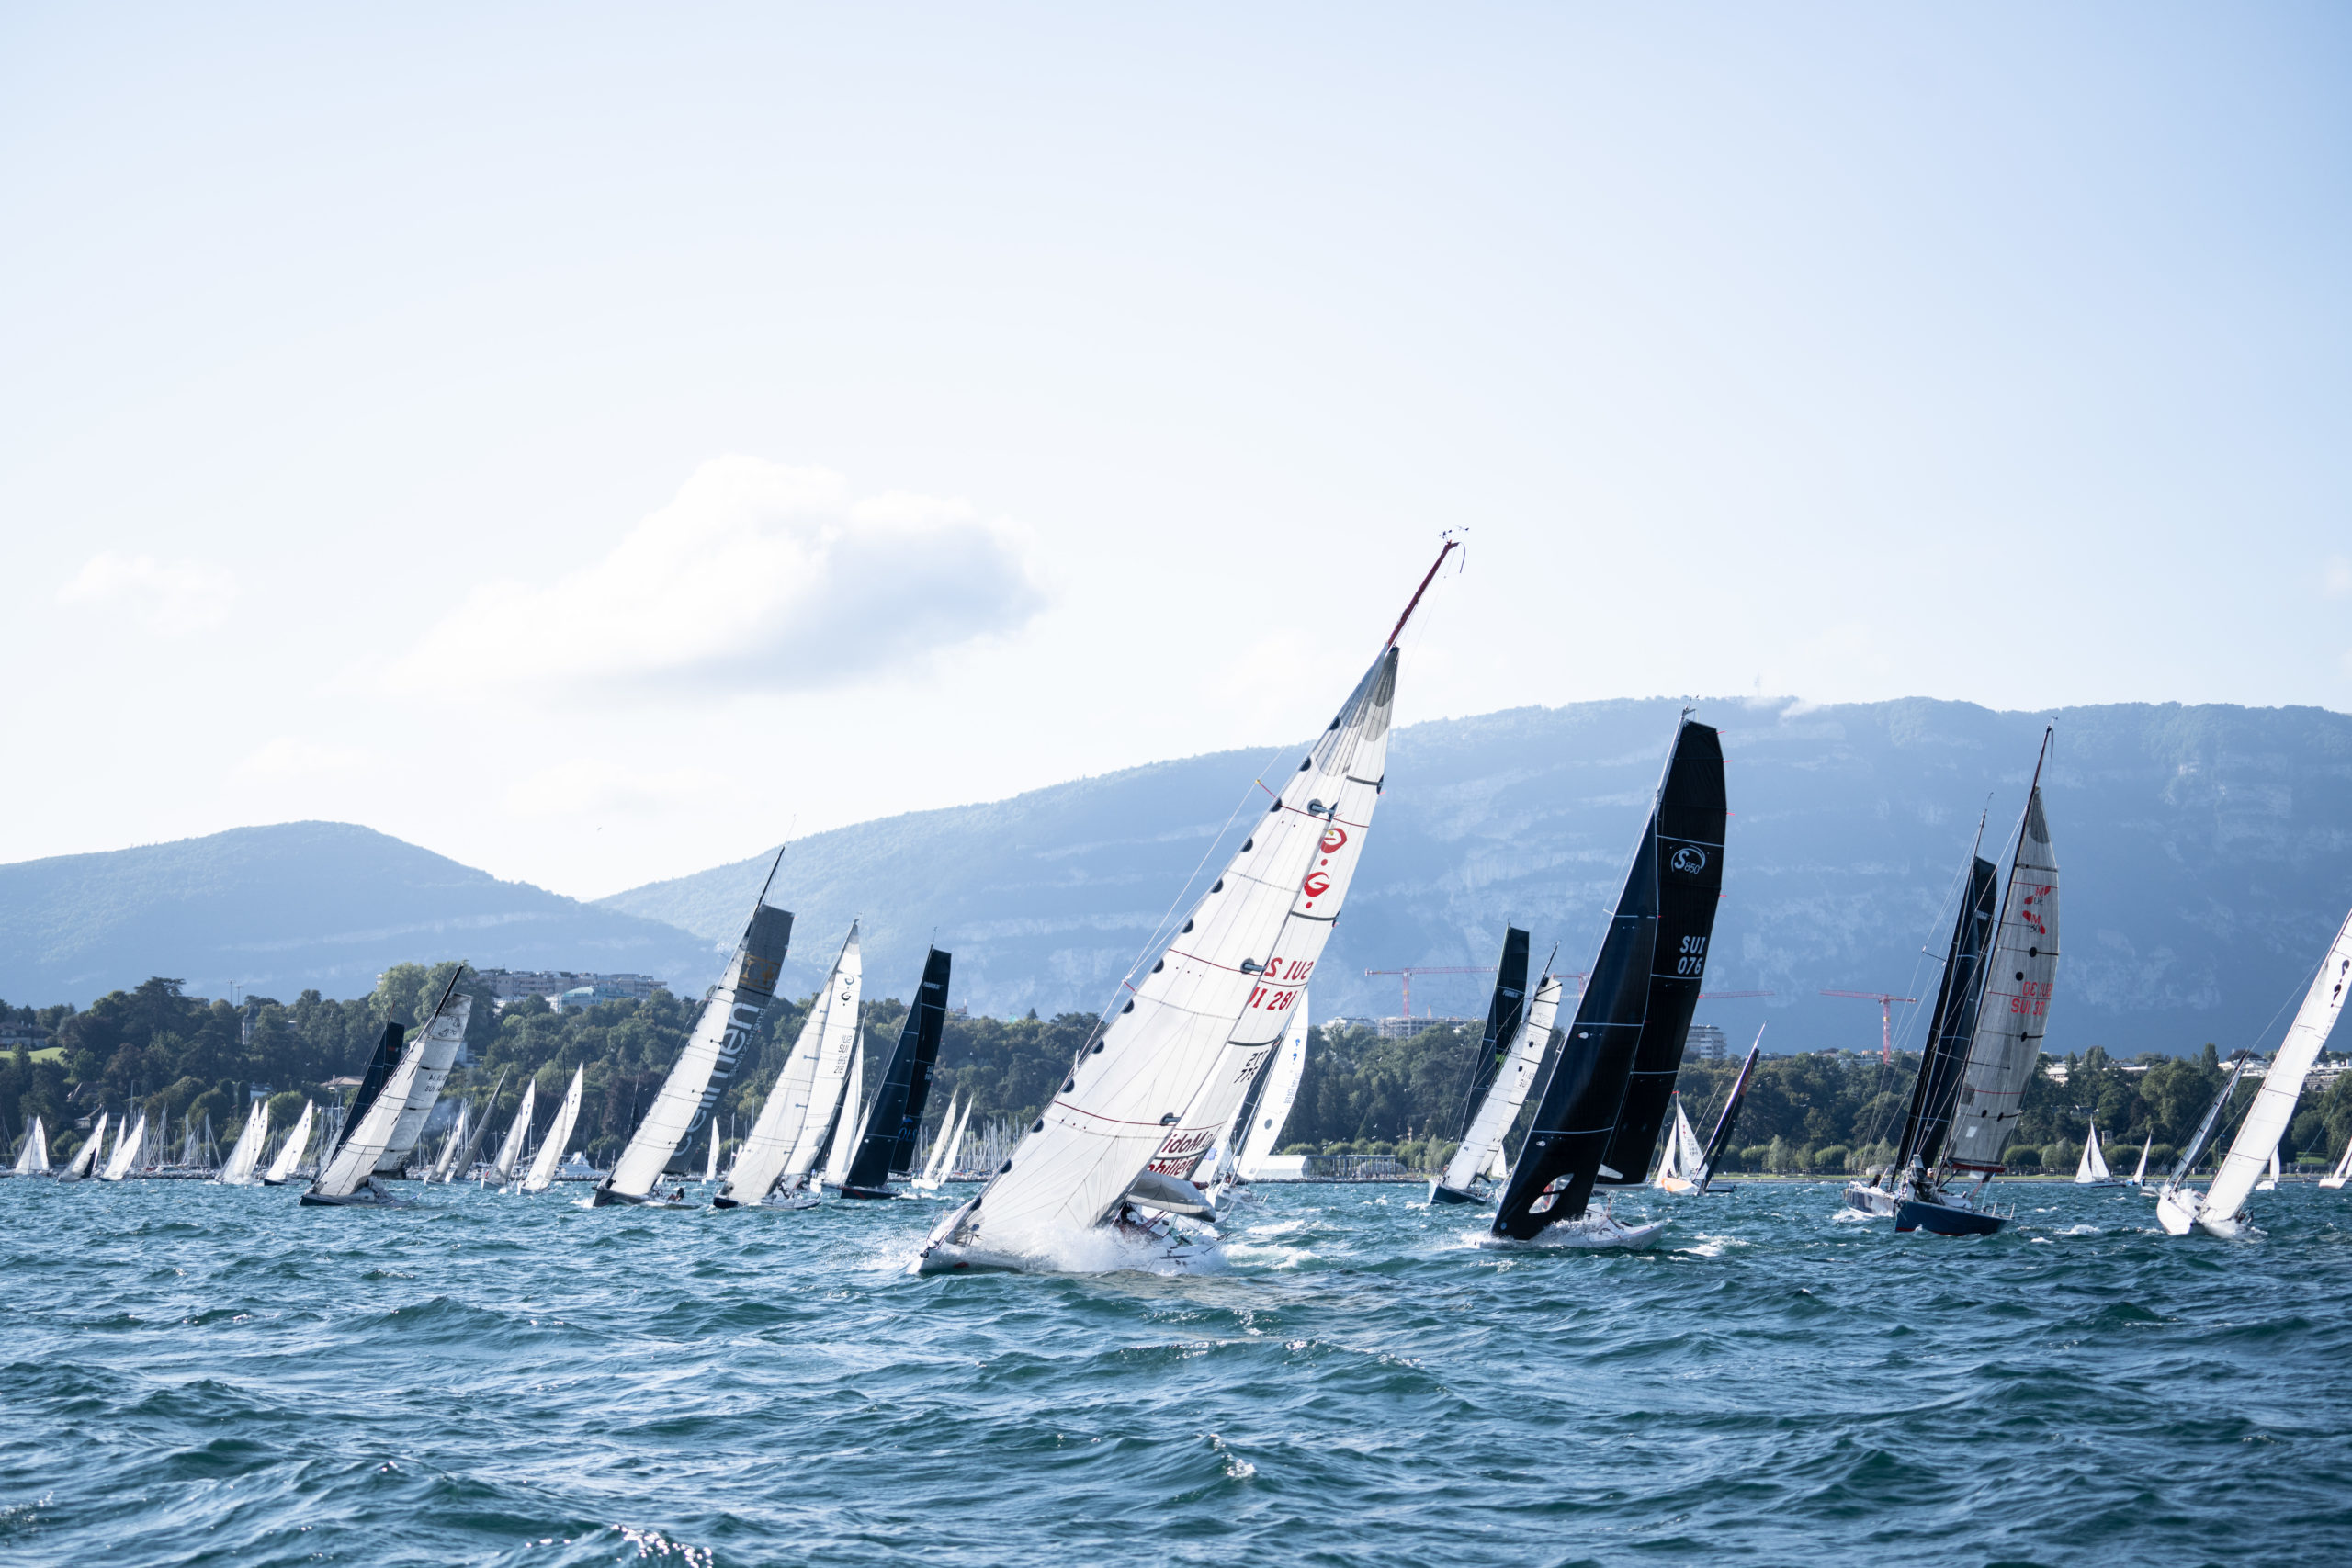 Syz Translémanique en Solitaire: big show this weekend at the start of the SNG